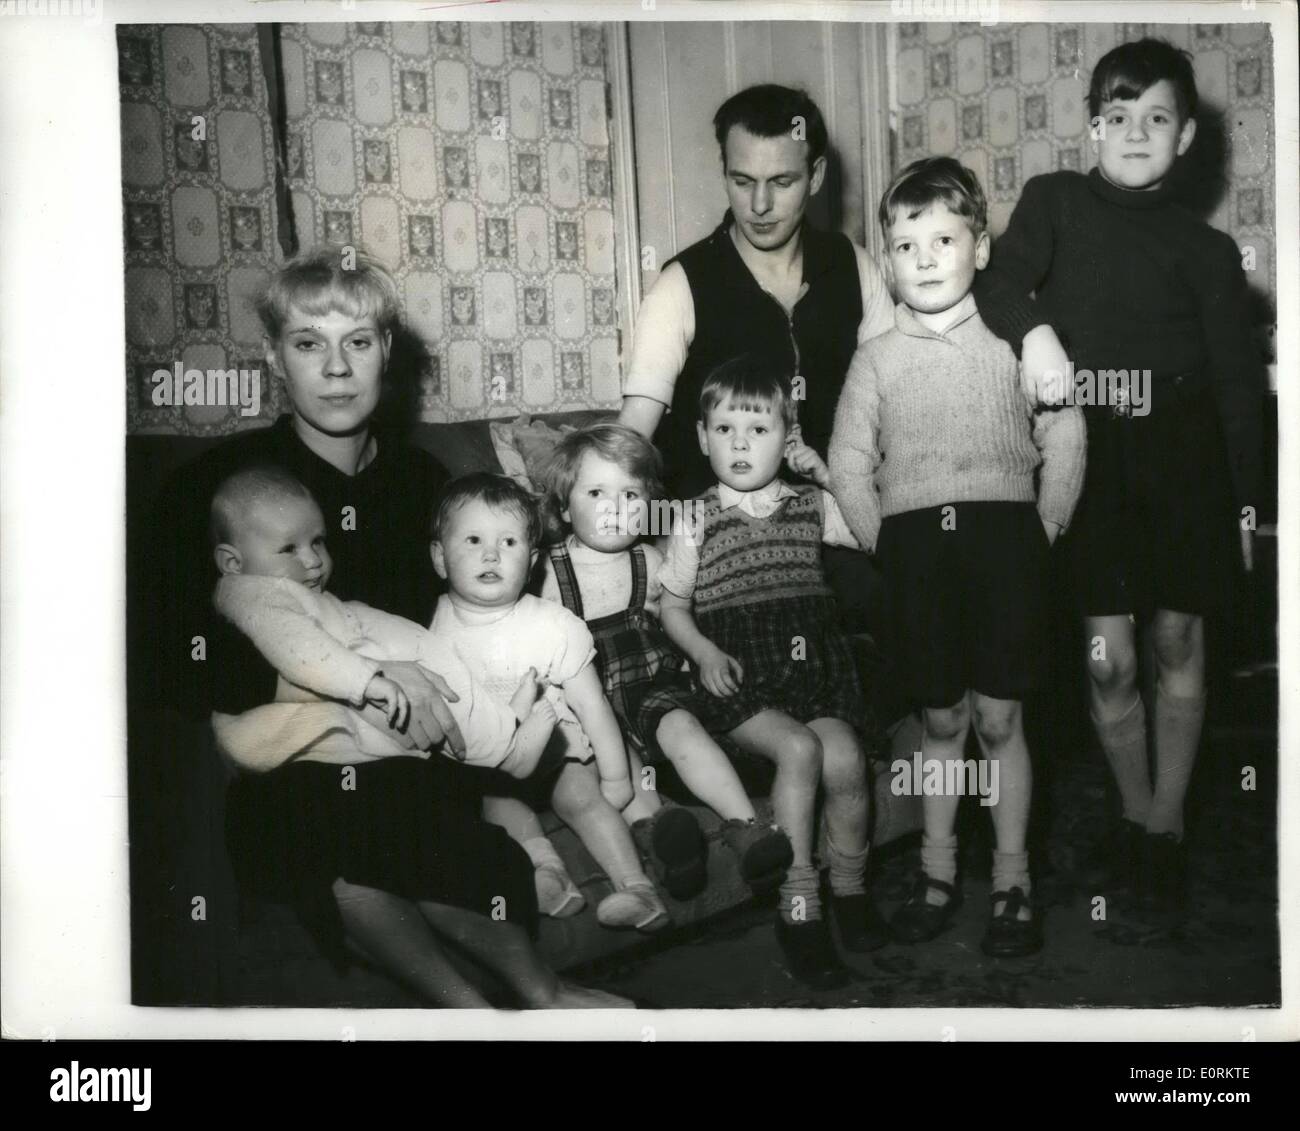 Jan. 01, 1960 - Sheffield parents want to give away five of their six children : twenty nine year old John Mason and his 28 year old wife Margaret of Ellesmere road, she field - have six children aged 5 month to 8 yrs. because of rent arrears - they are expecting to be evicted from their home - so they state that they want to give away five pf the children - have them by his grandparents until the masons are settled once again and could have him back. photo shows Mr. and Mrs Stock Photo